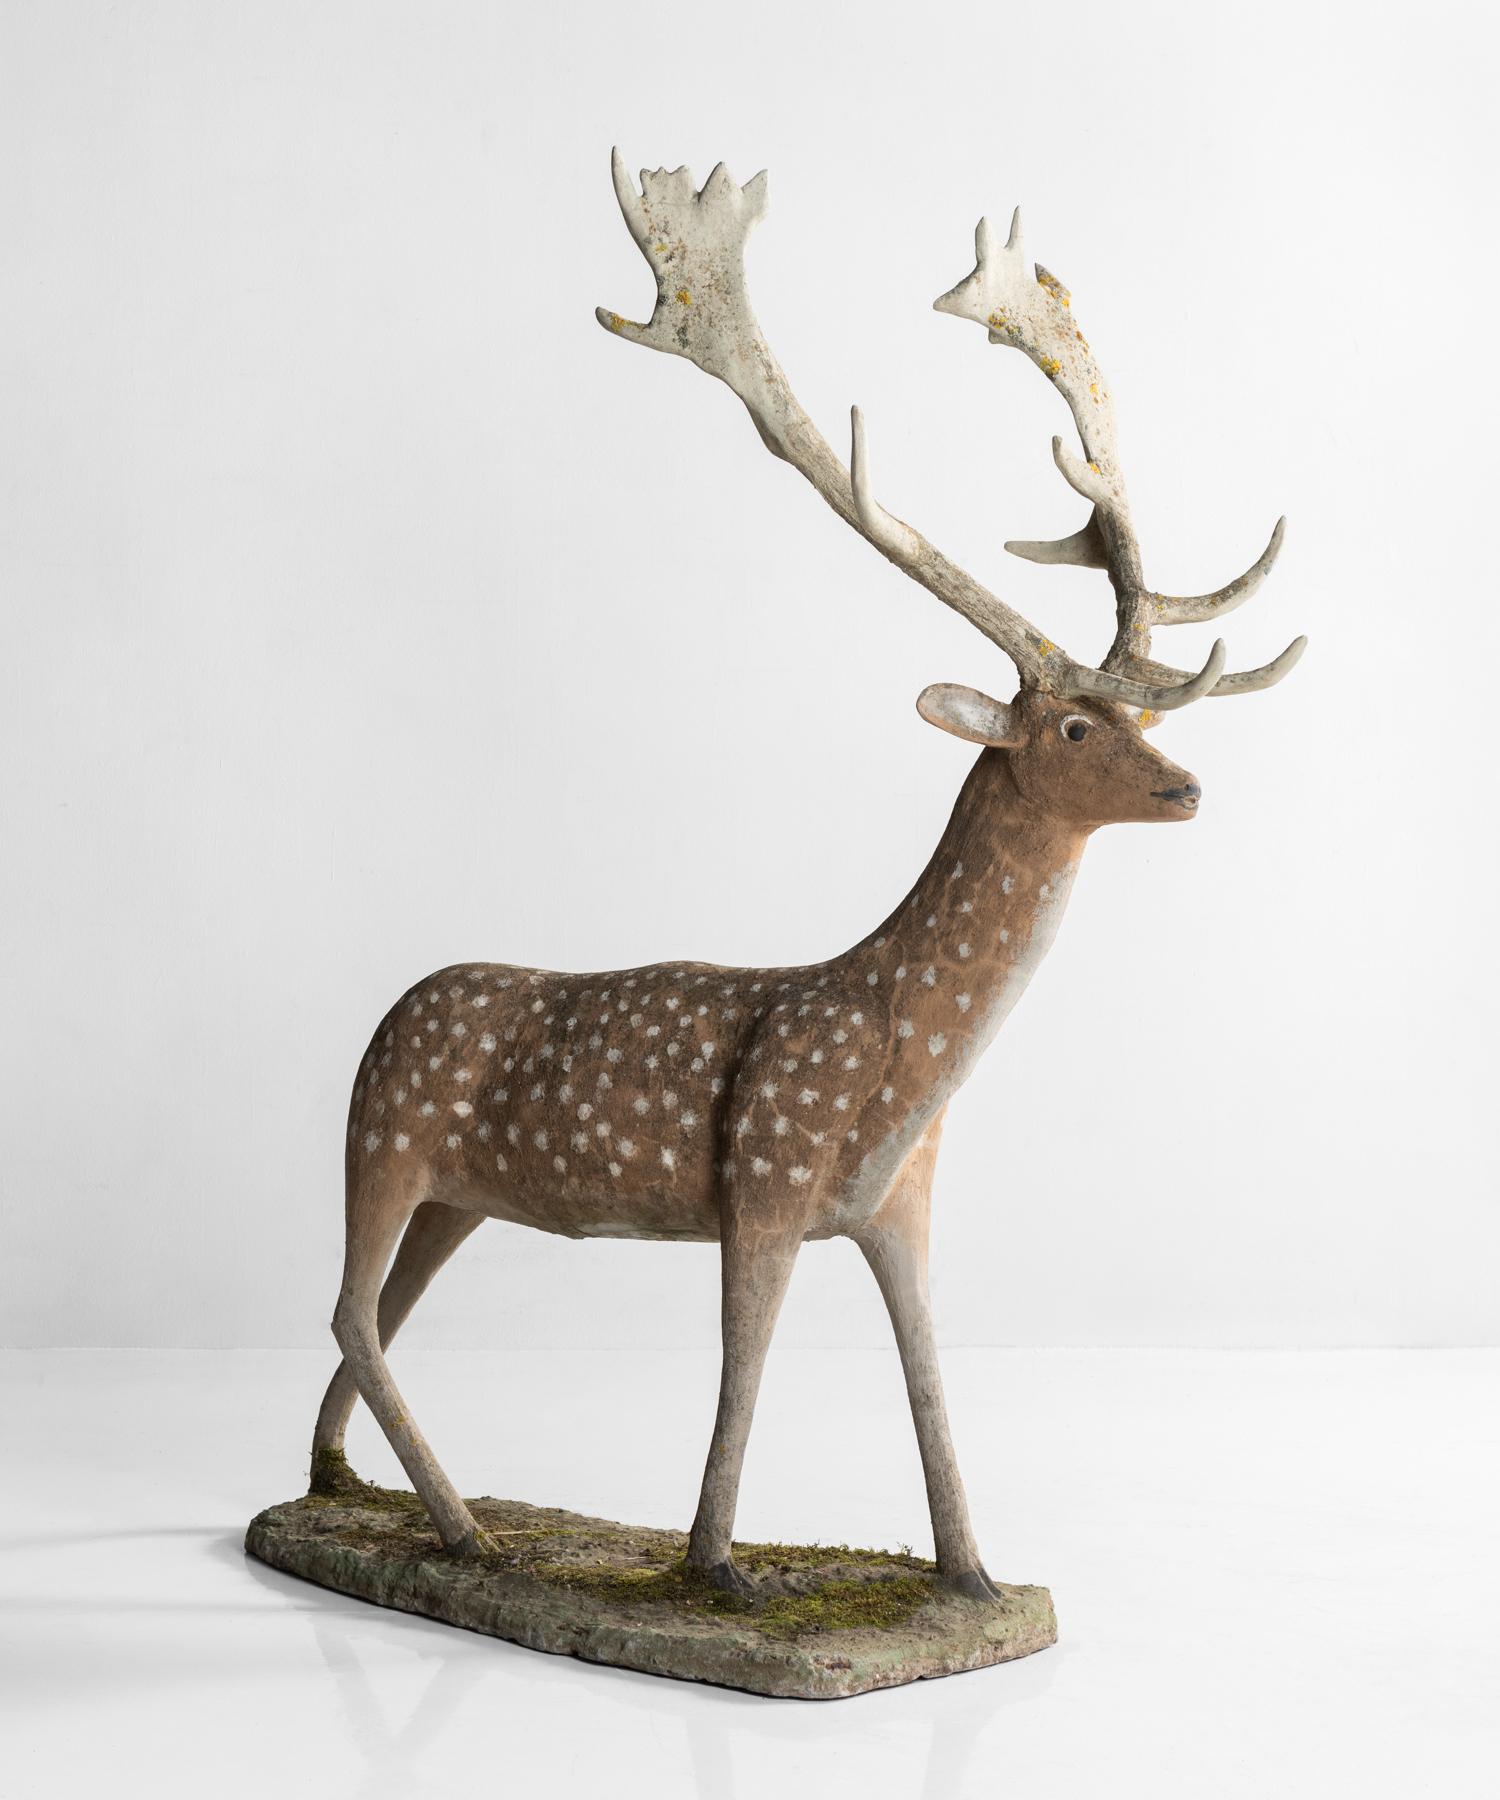 Painted cement deer, France, circa 1950

Incredible life-size Folk Art stag, in original period paint.